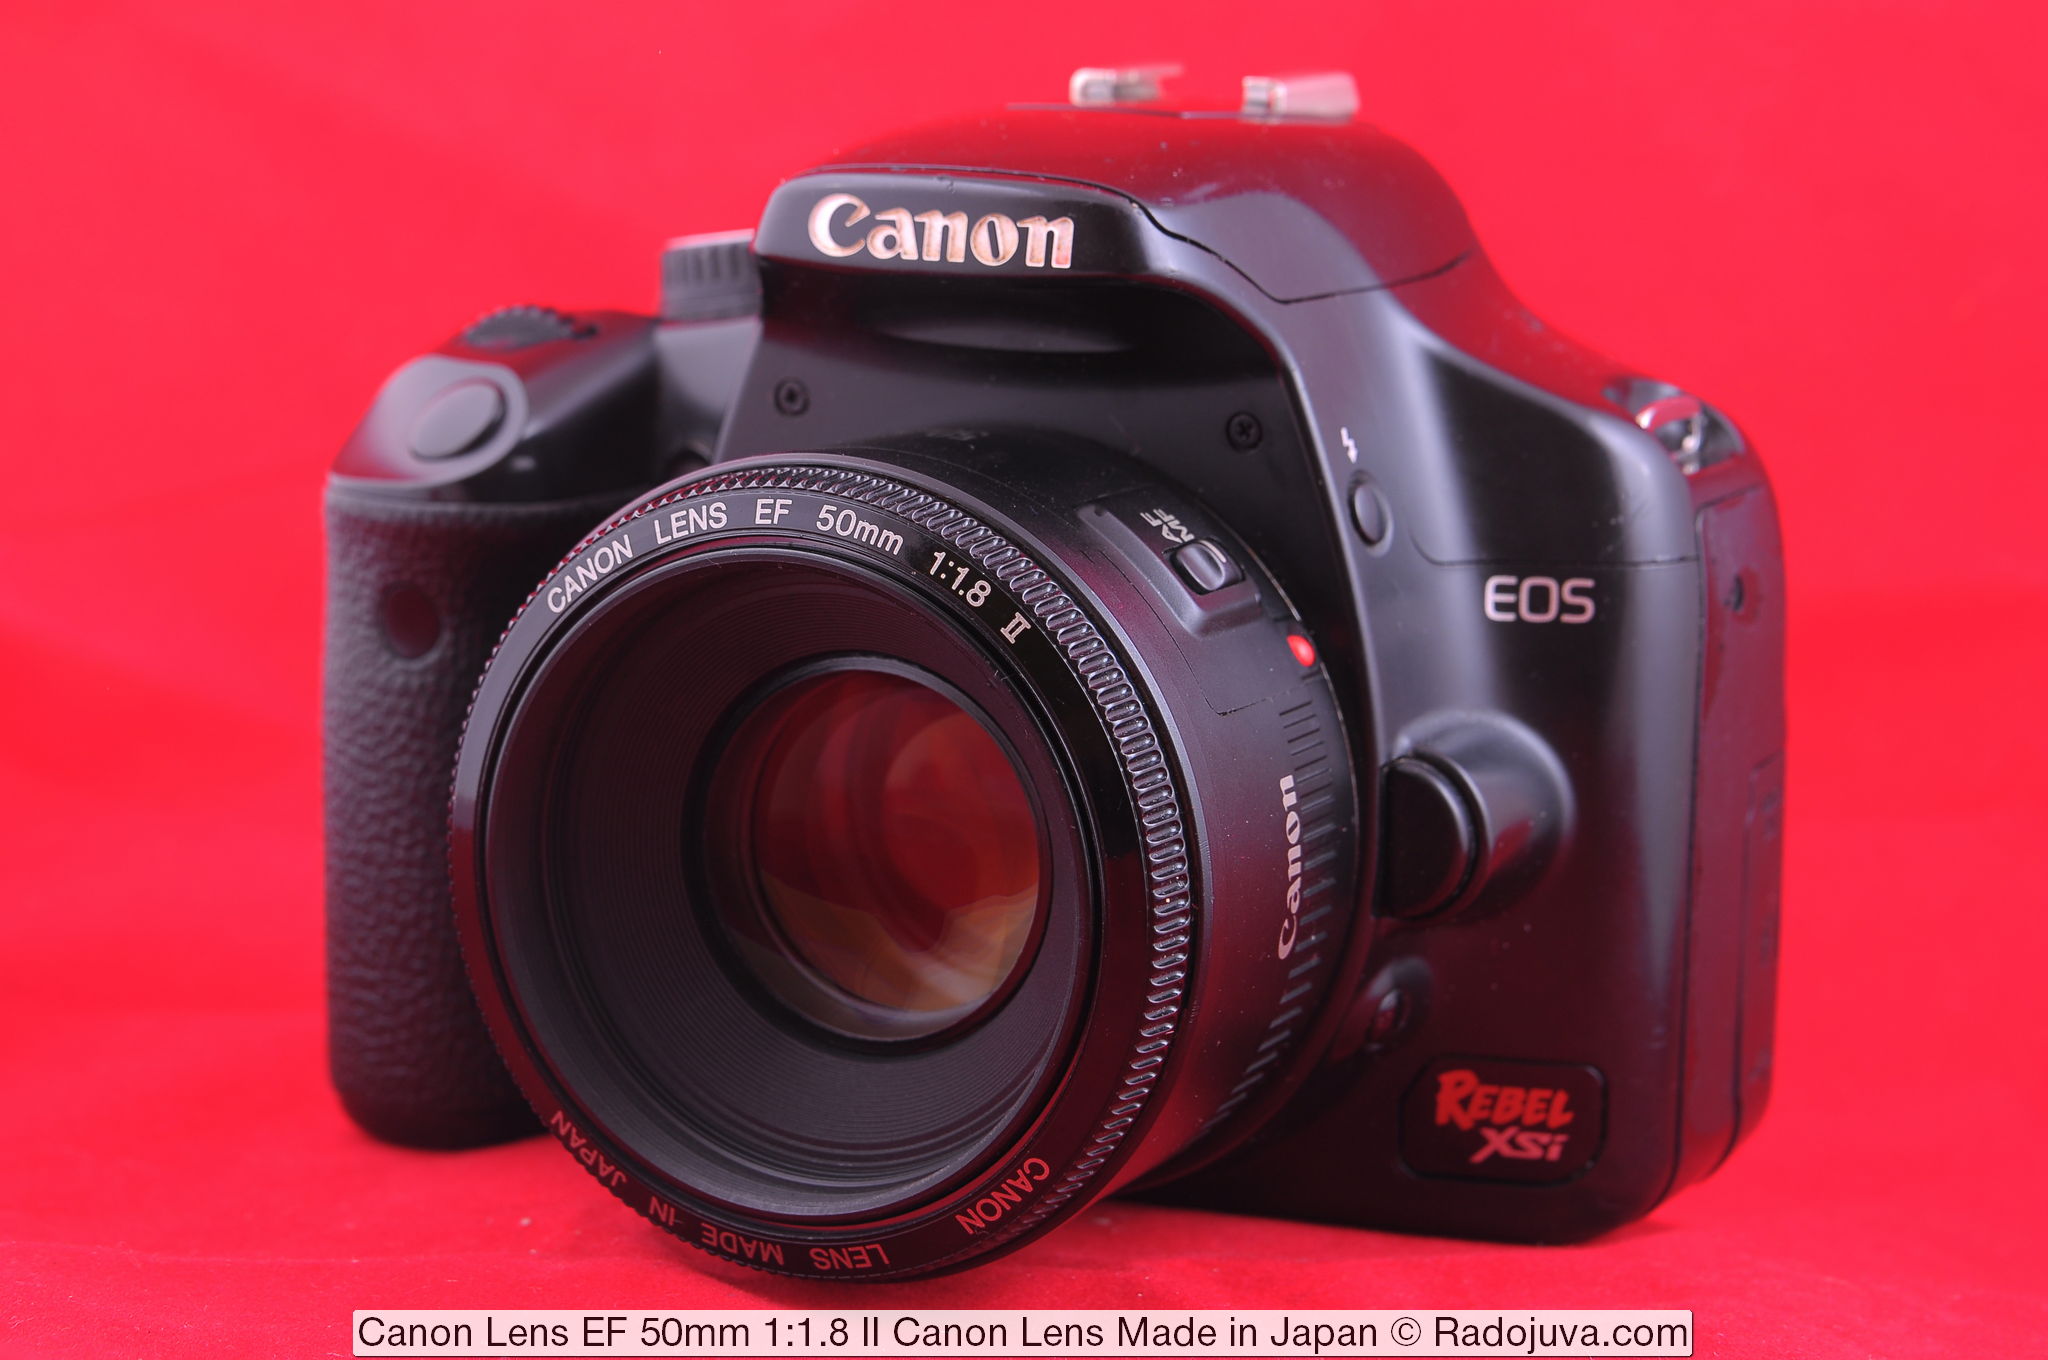 Canon Lens EF 50mm 1:1.8 II, версия 'Canon Lens Made in Japan'